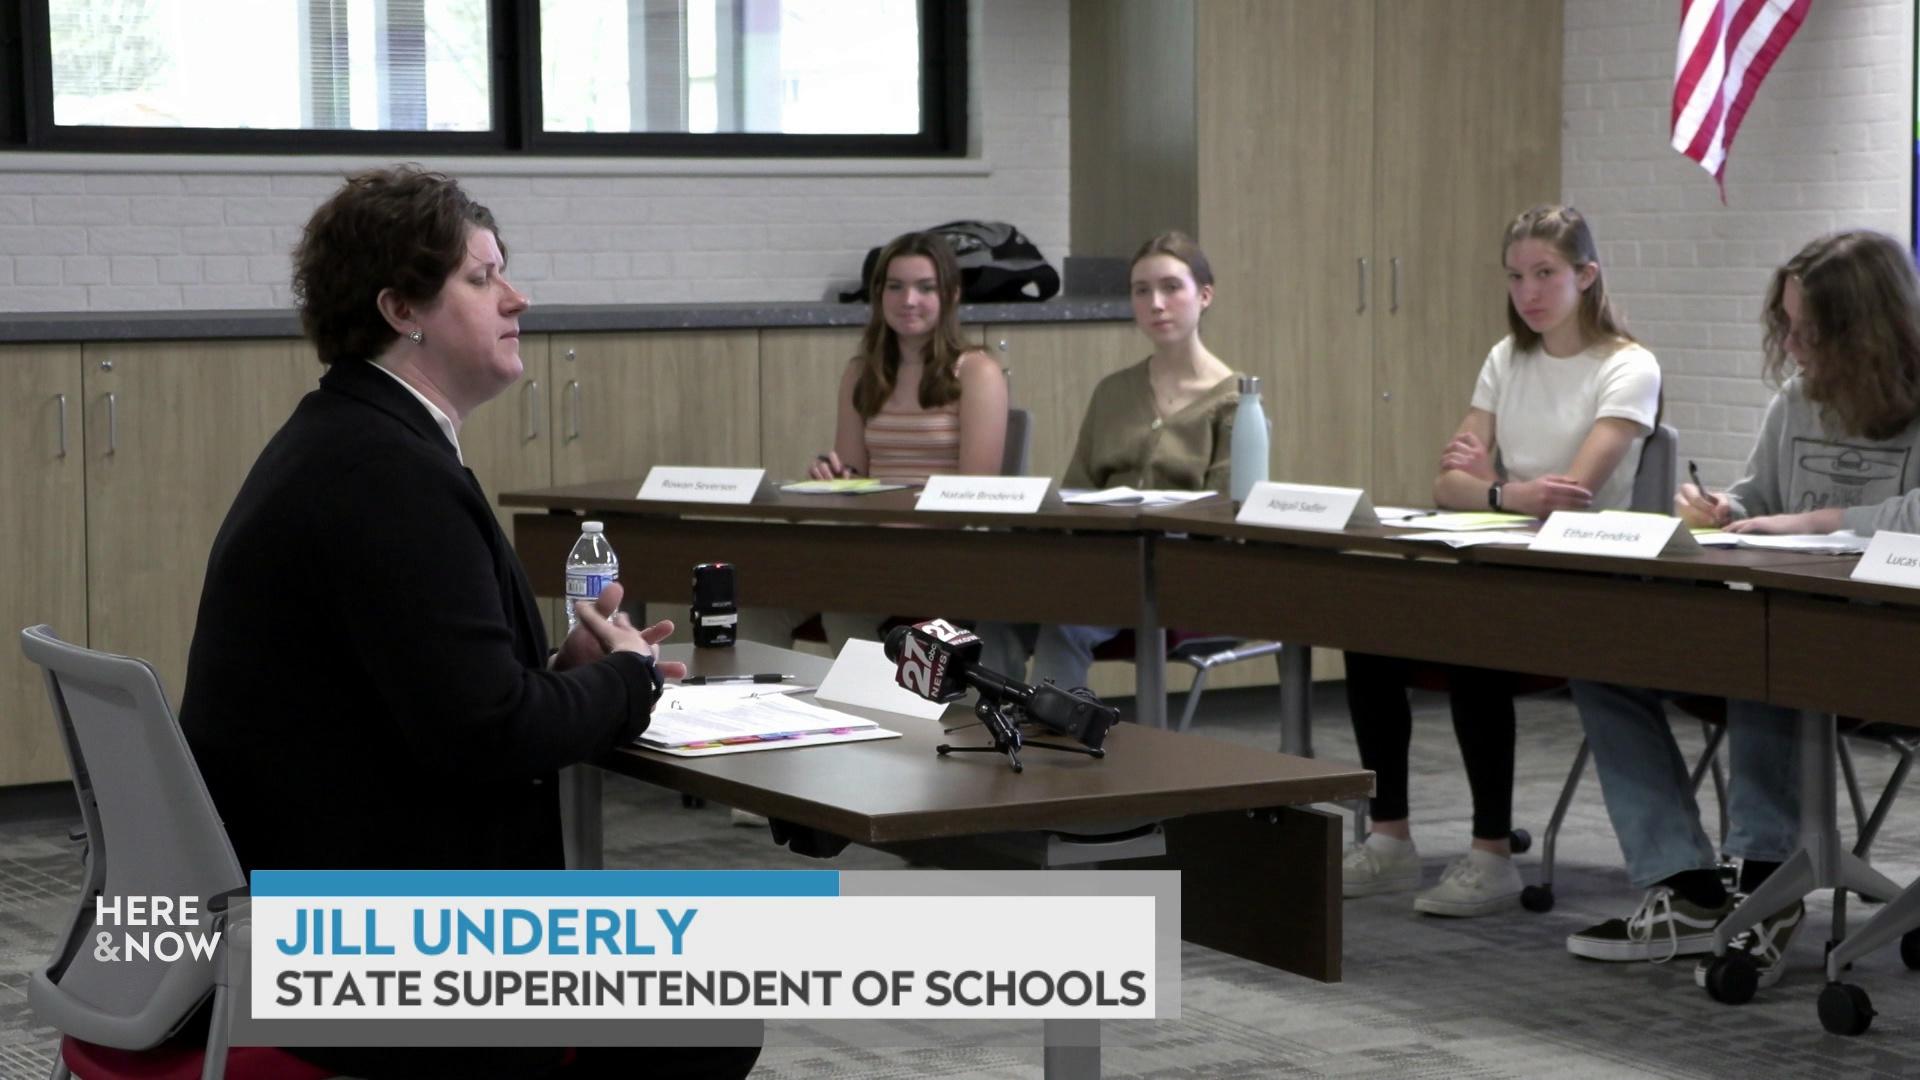 A still image from a video shows Jill Underly seated at a desk facing a panel of high school students with a graphic at bottom reading 'Jill Underly' and 'State Superintendent of Schools.'